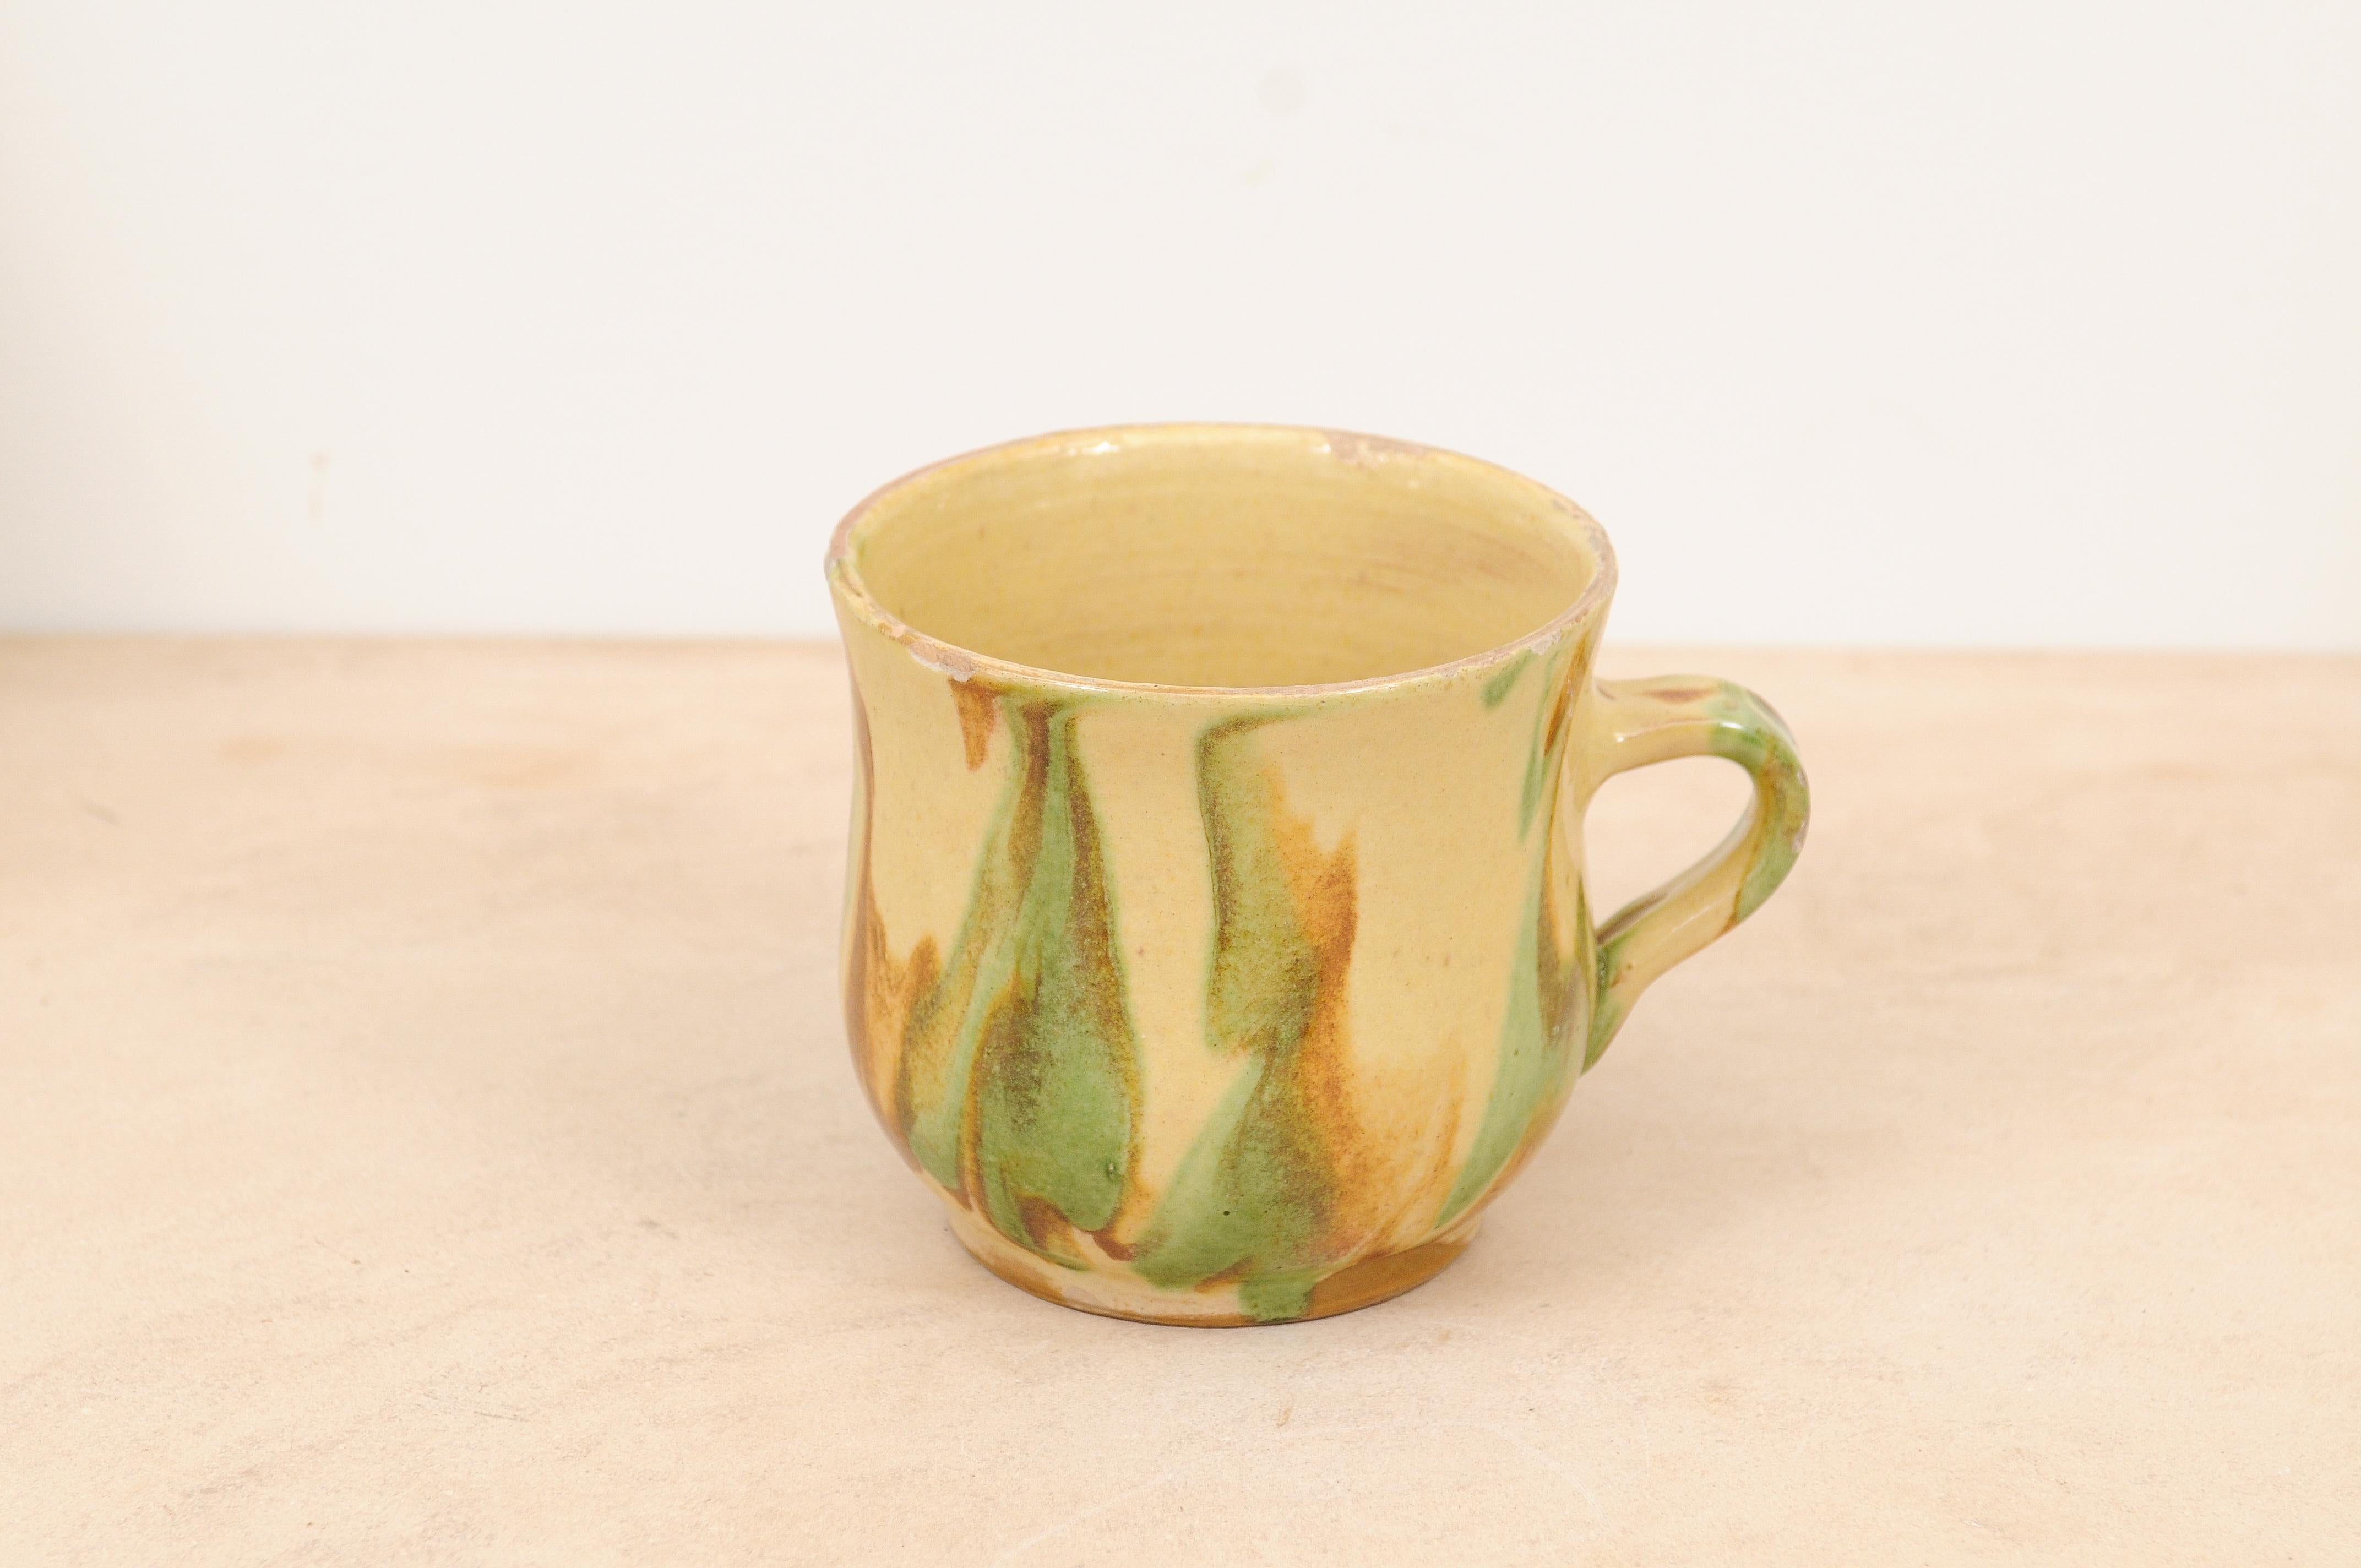 Rustic French 19th Century Pottery Mug with Yellow, Green and Rust Glaze For Sale 3